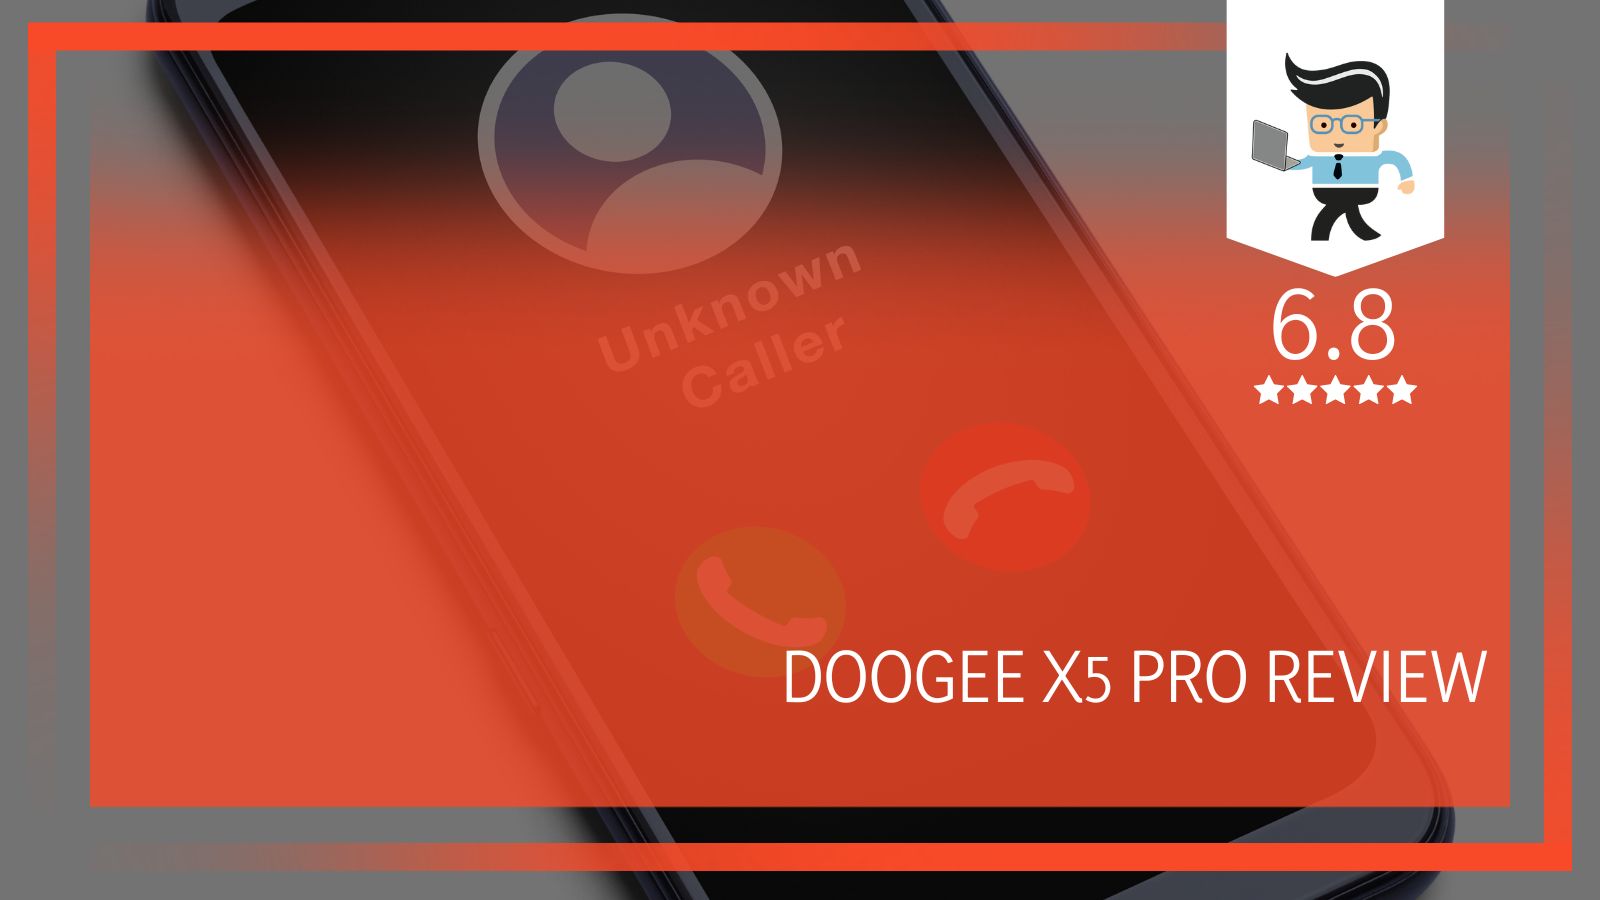 Doogee X5 Pro Review Pros and Cons